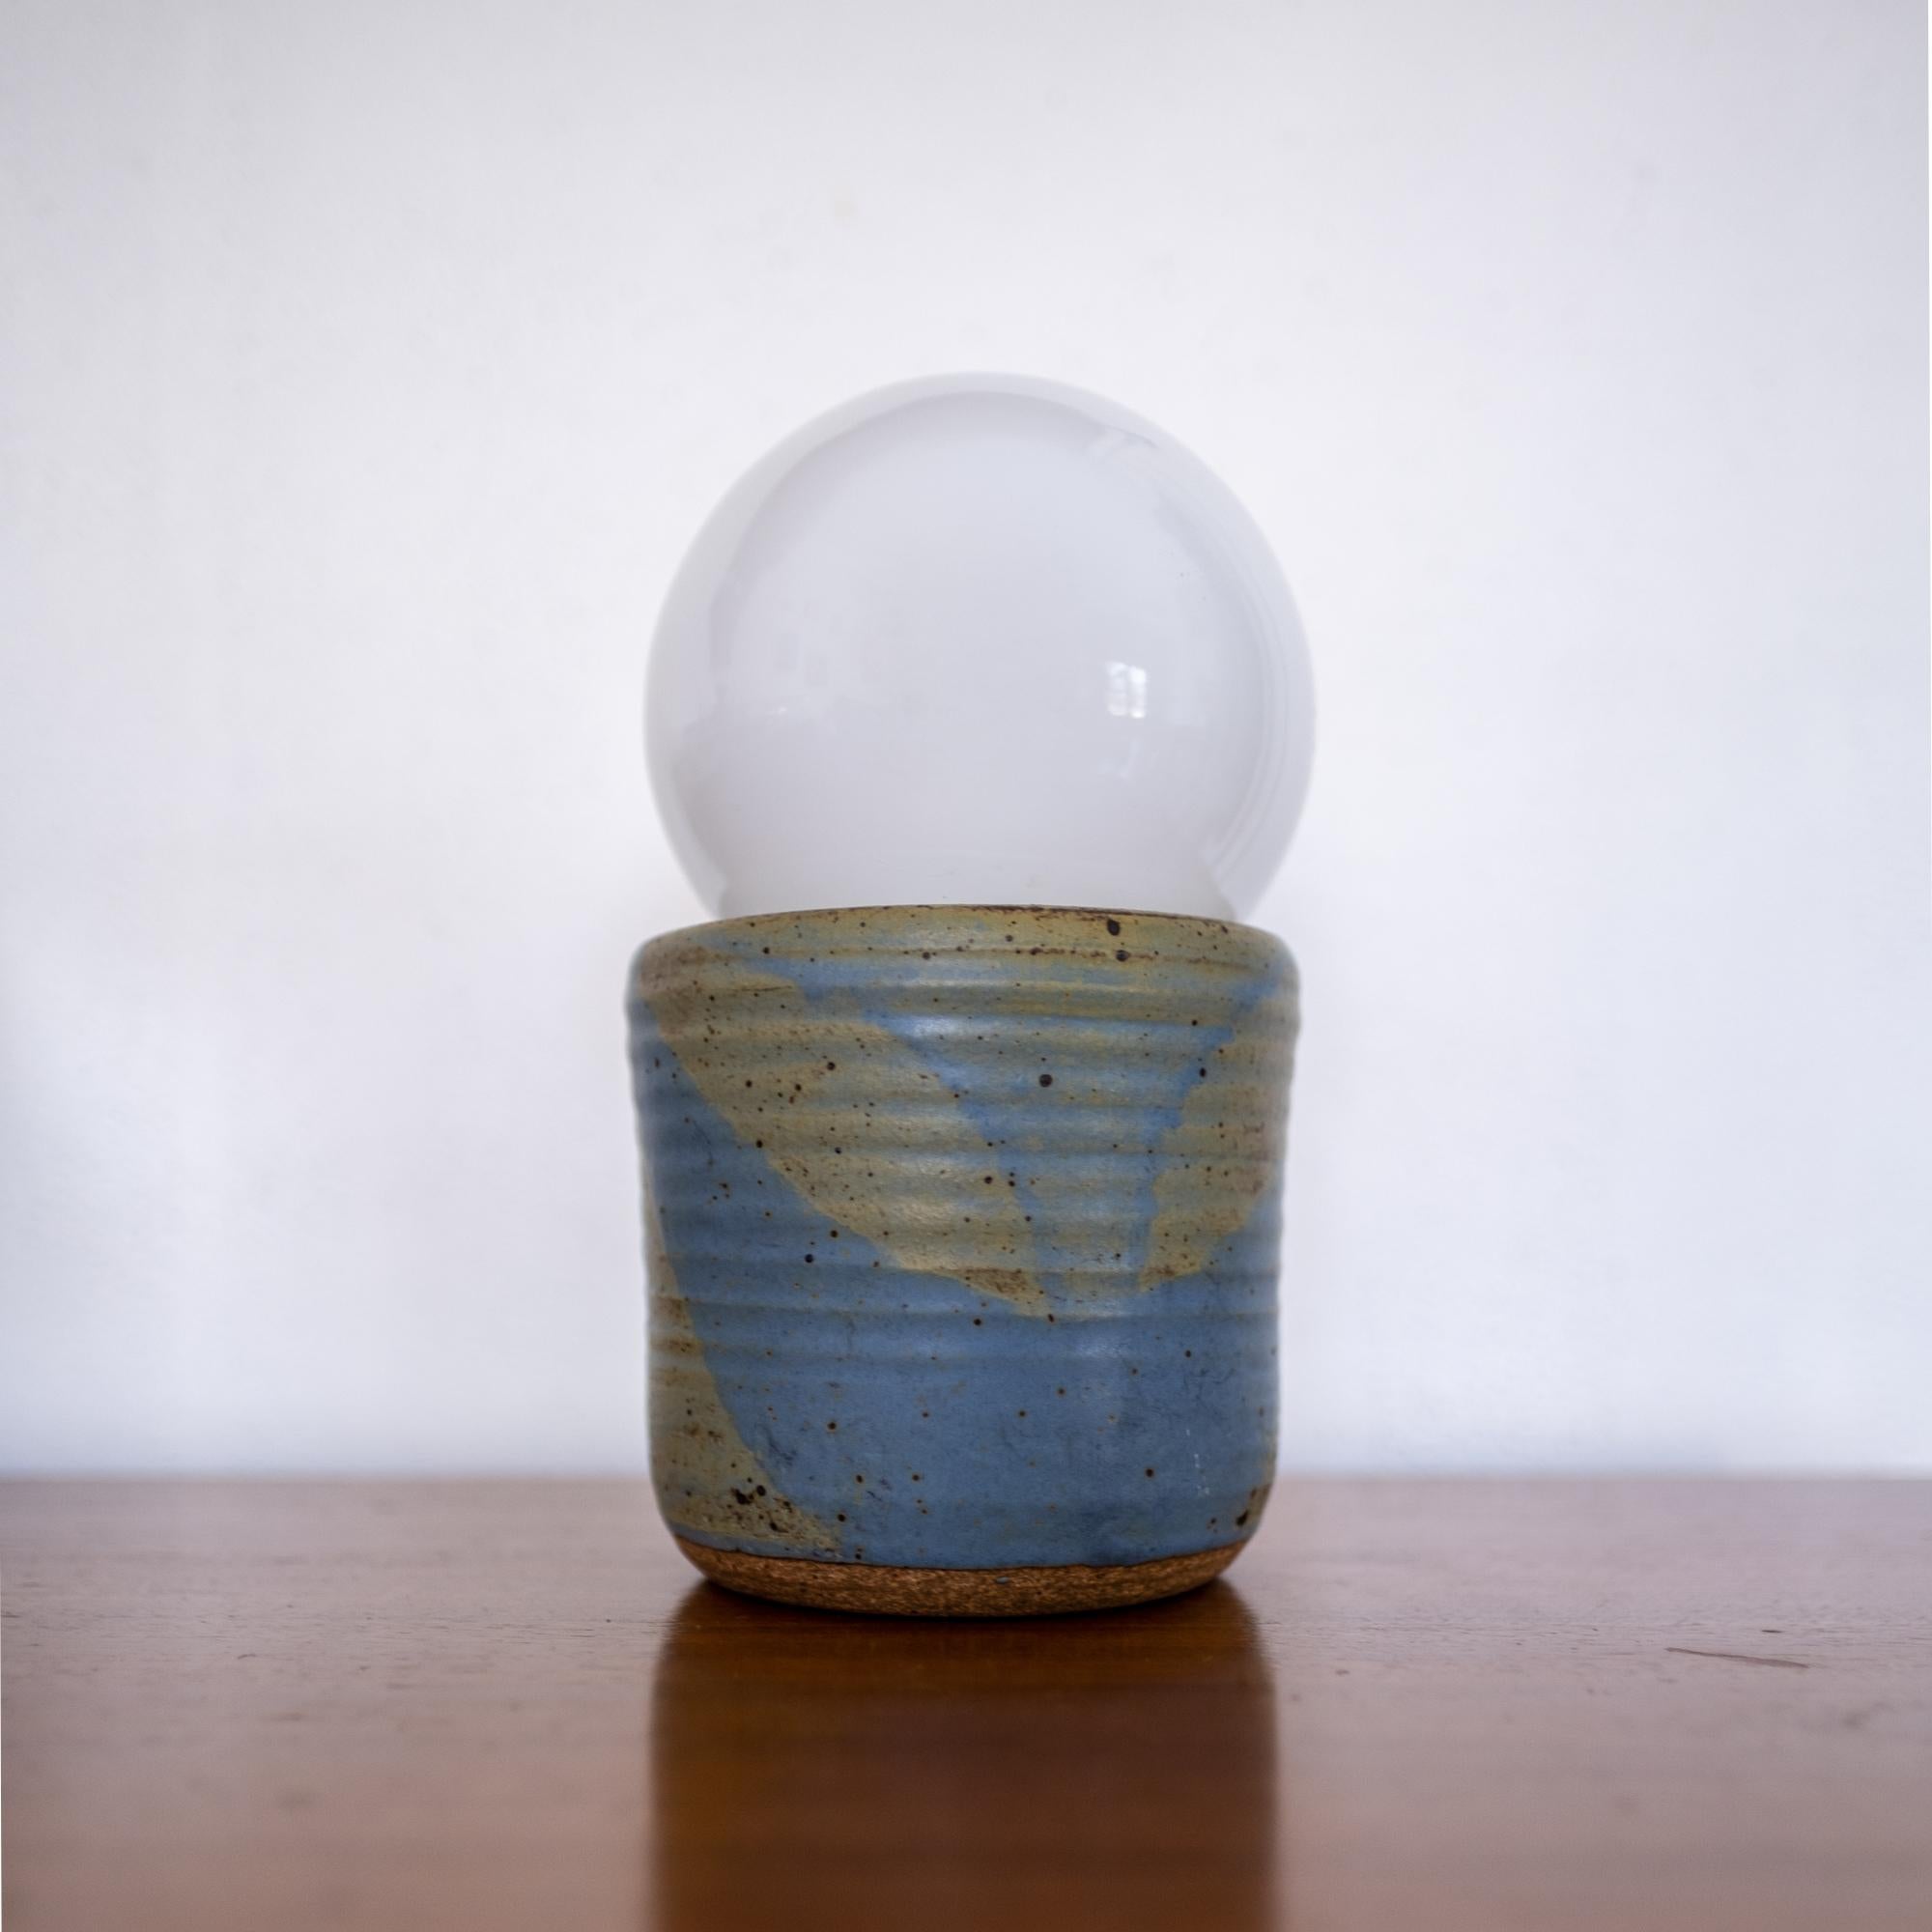 Hand-thrown stoneware lamp with blue and green glaze, 1960s.